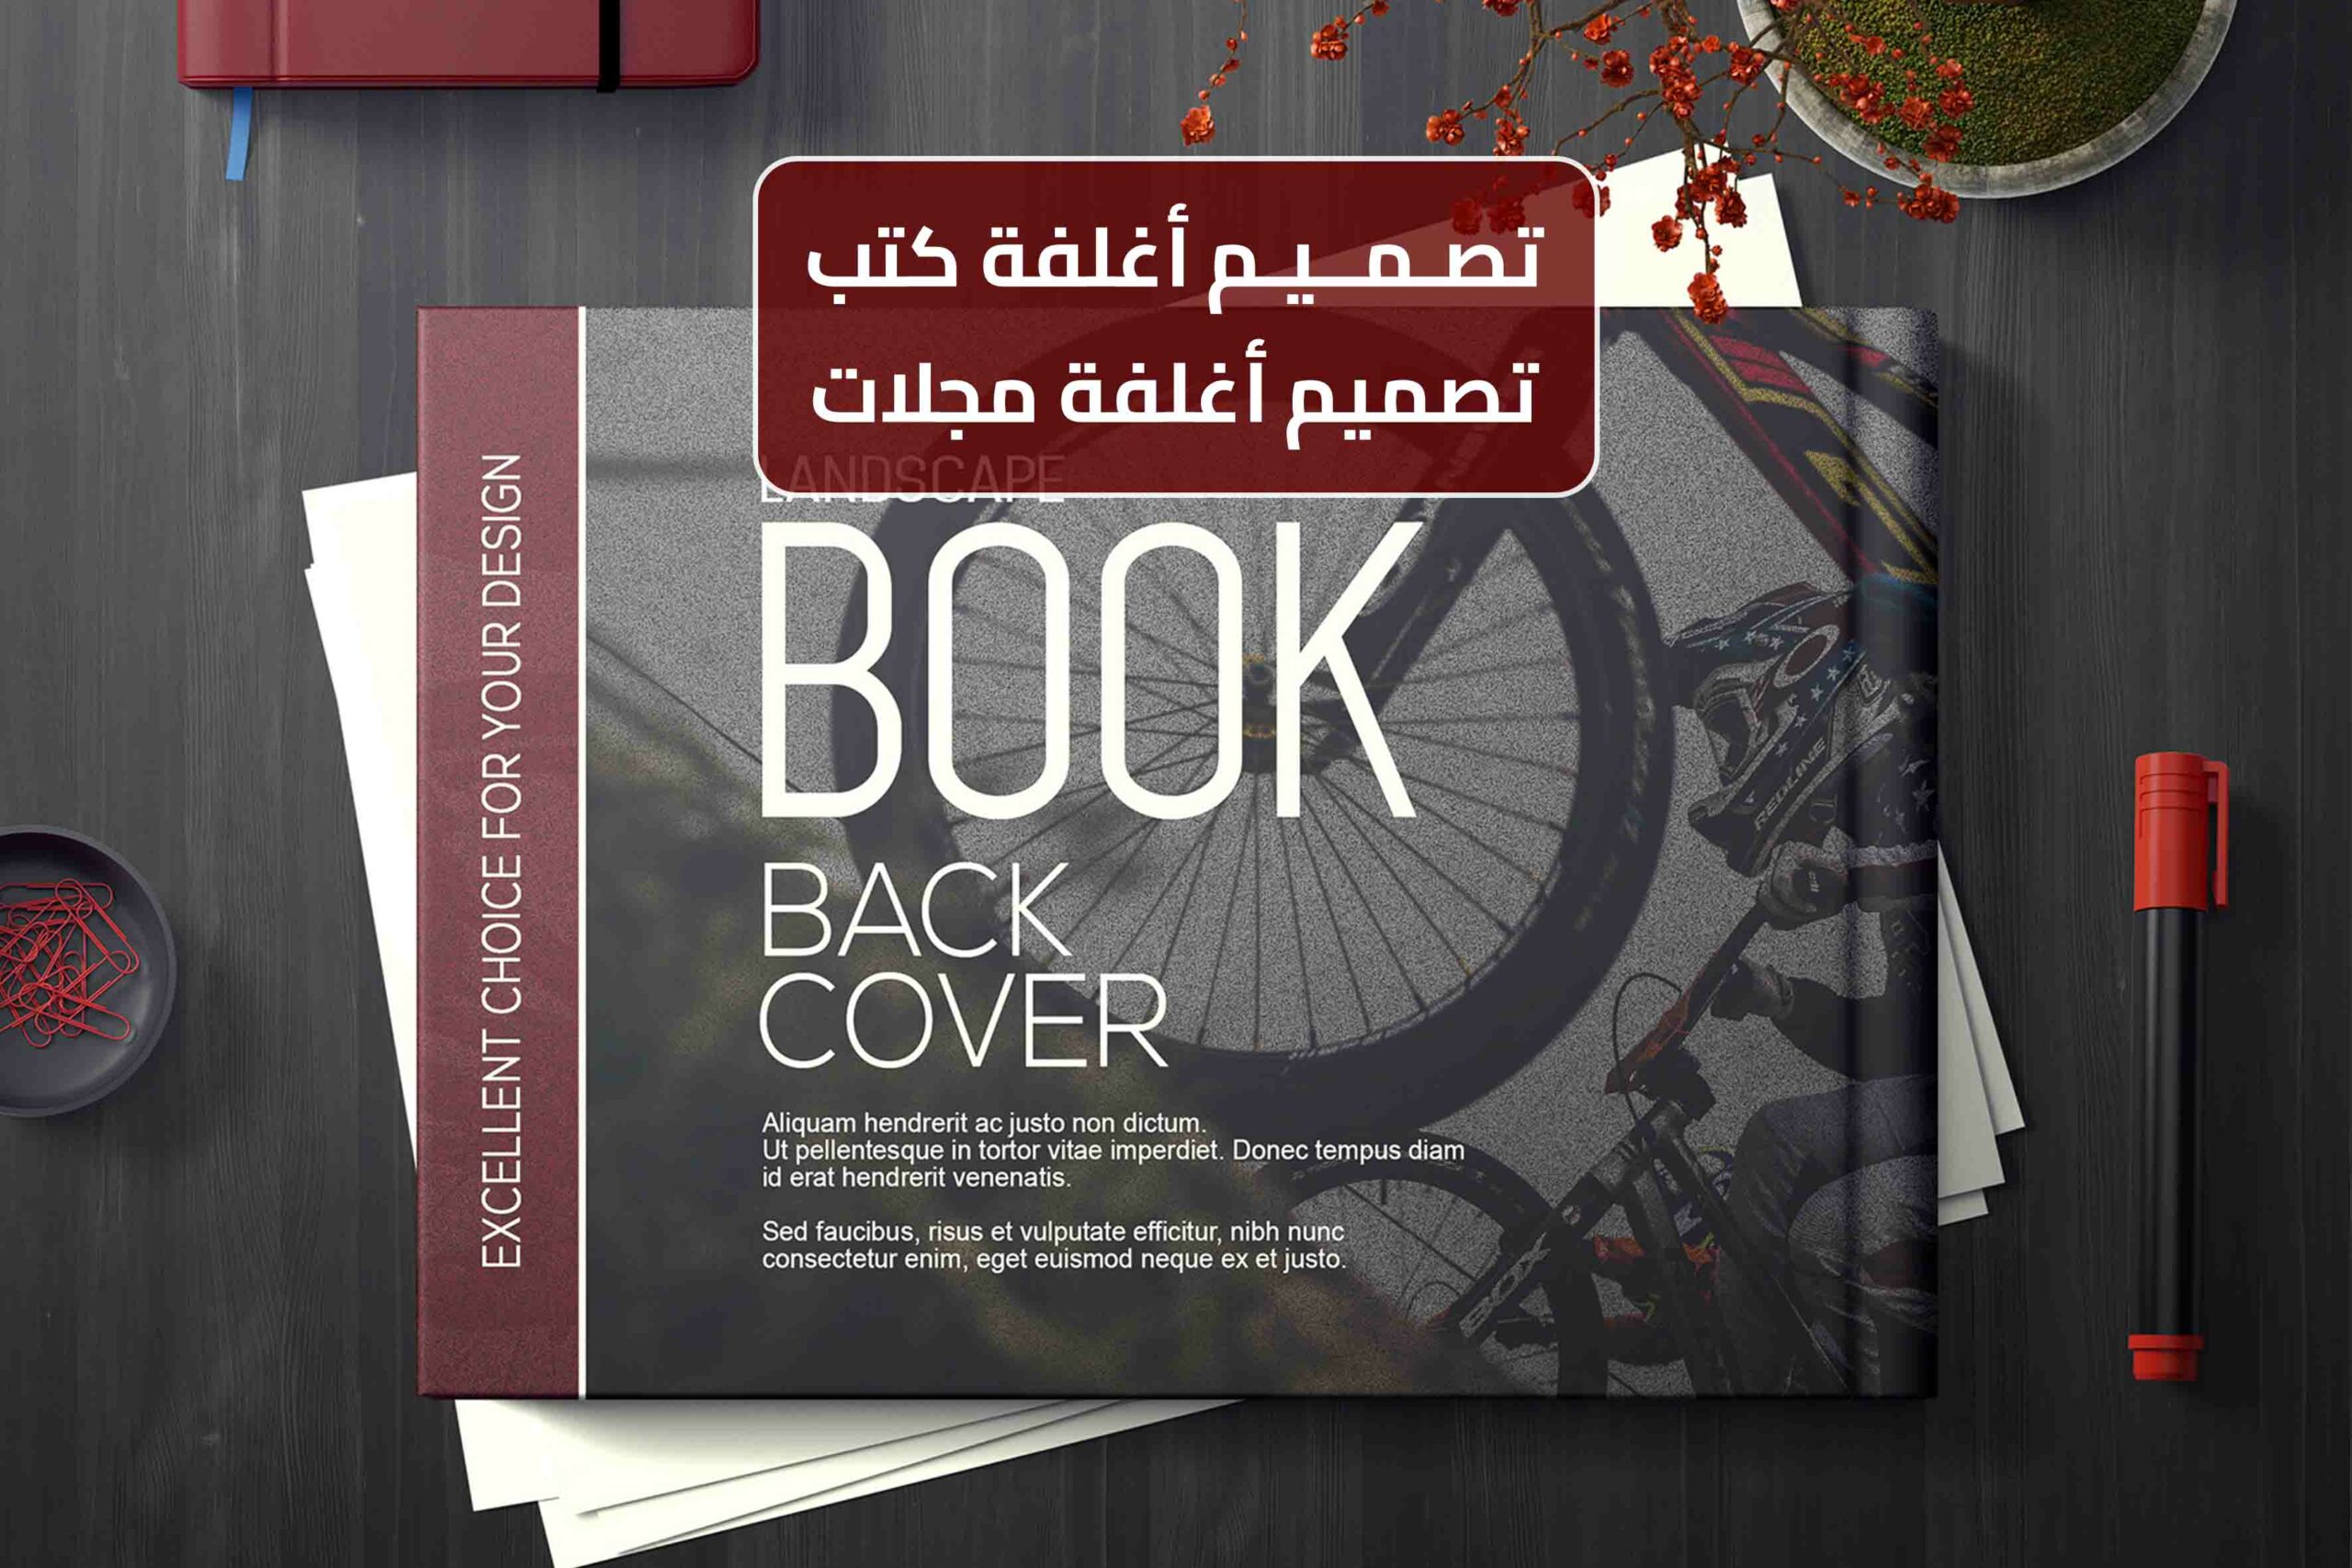 Book and magazine covers